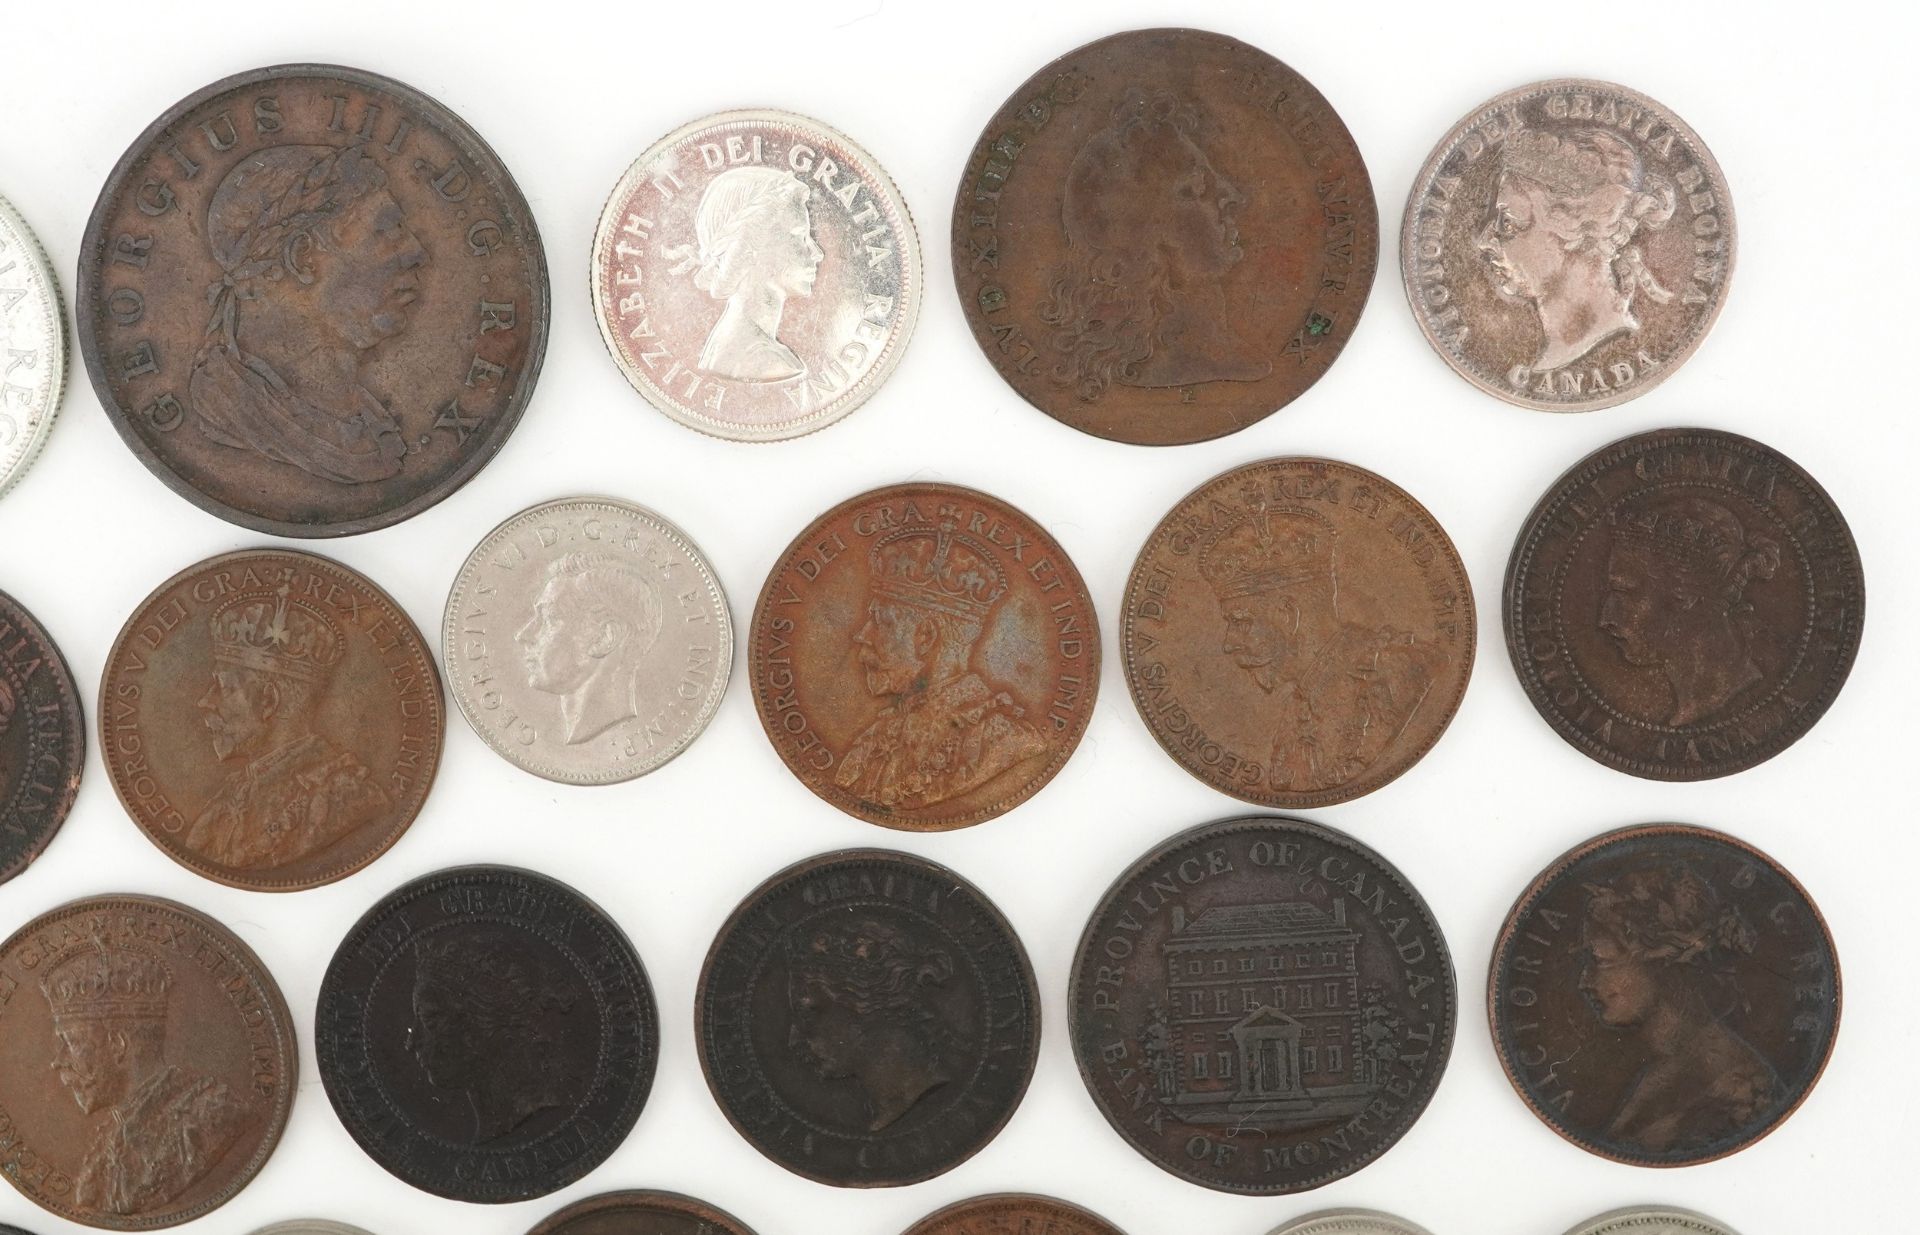 Early 19th century and later Canadian coinage and tokens including Nova Scotia one penny tokens, - Image 14 of 20